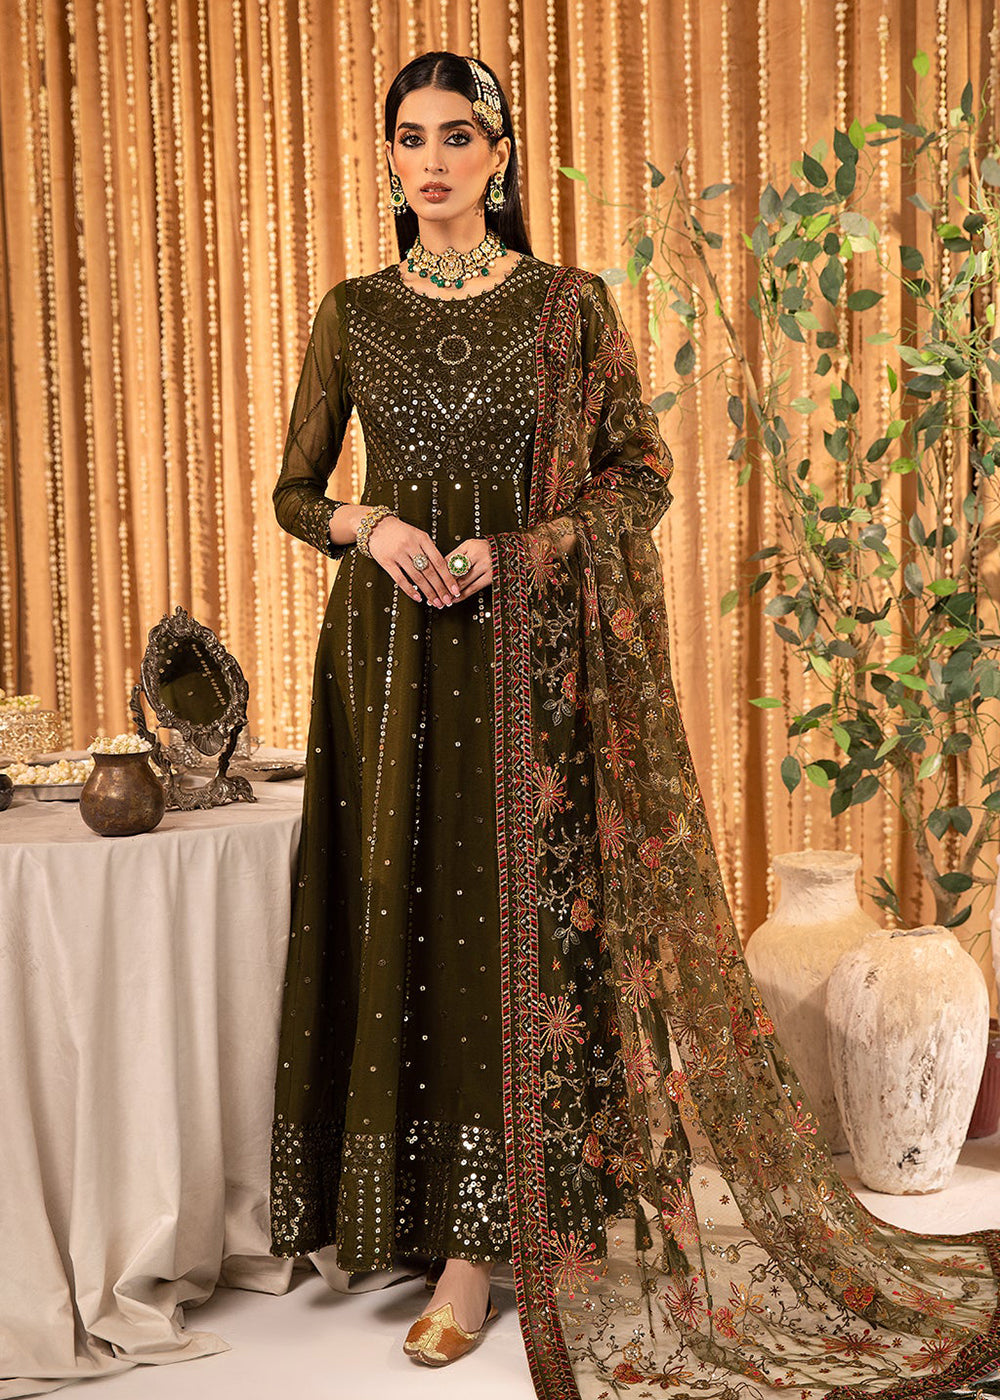 Buy Now Mehfil E Uroos Luxury Formals 23 by Alizeh | V16D07 - Mahveen Online in USA, UK, Canada & Worldwide at Empress Clothing.